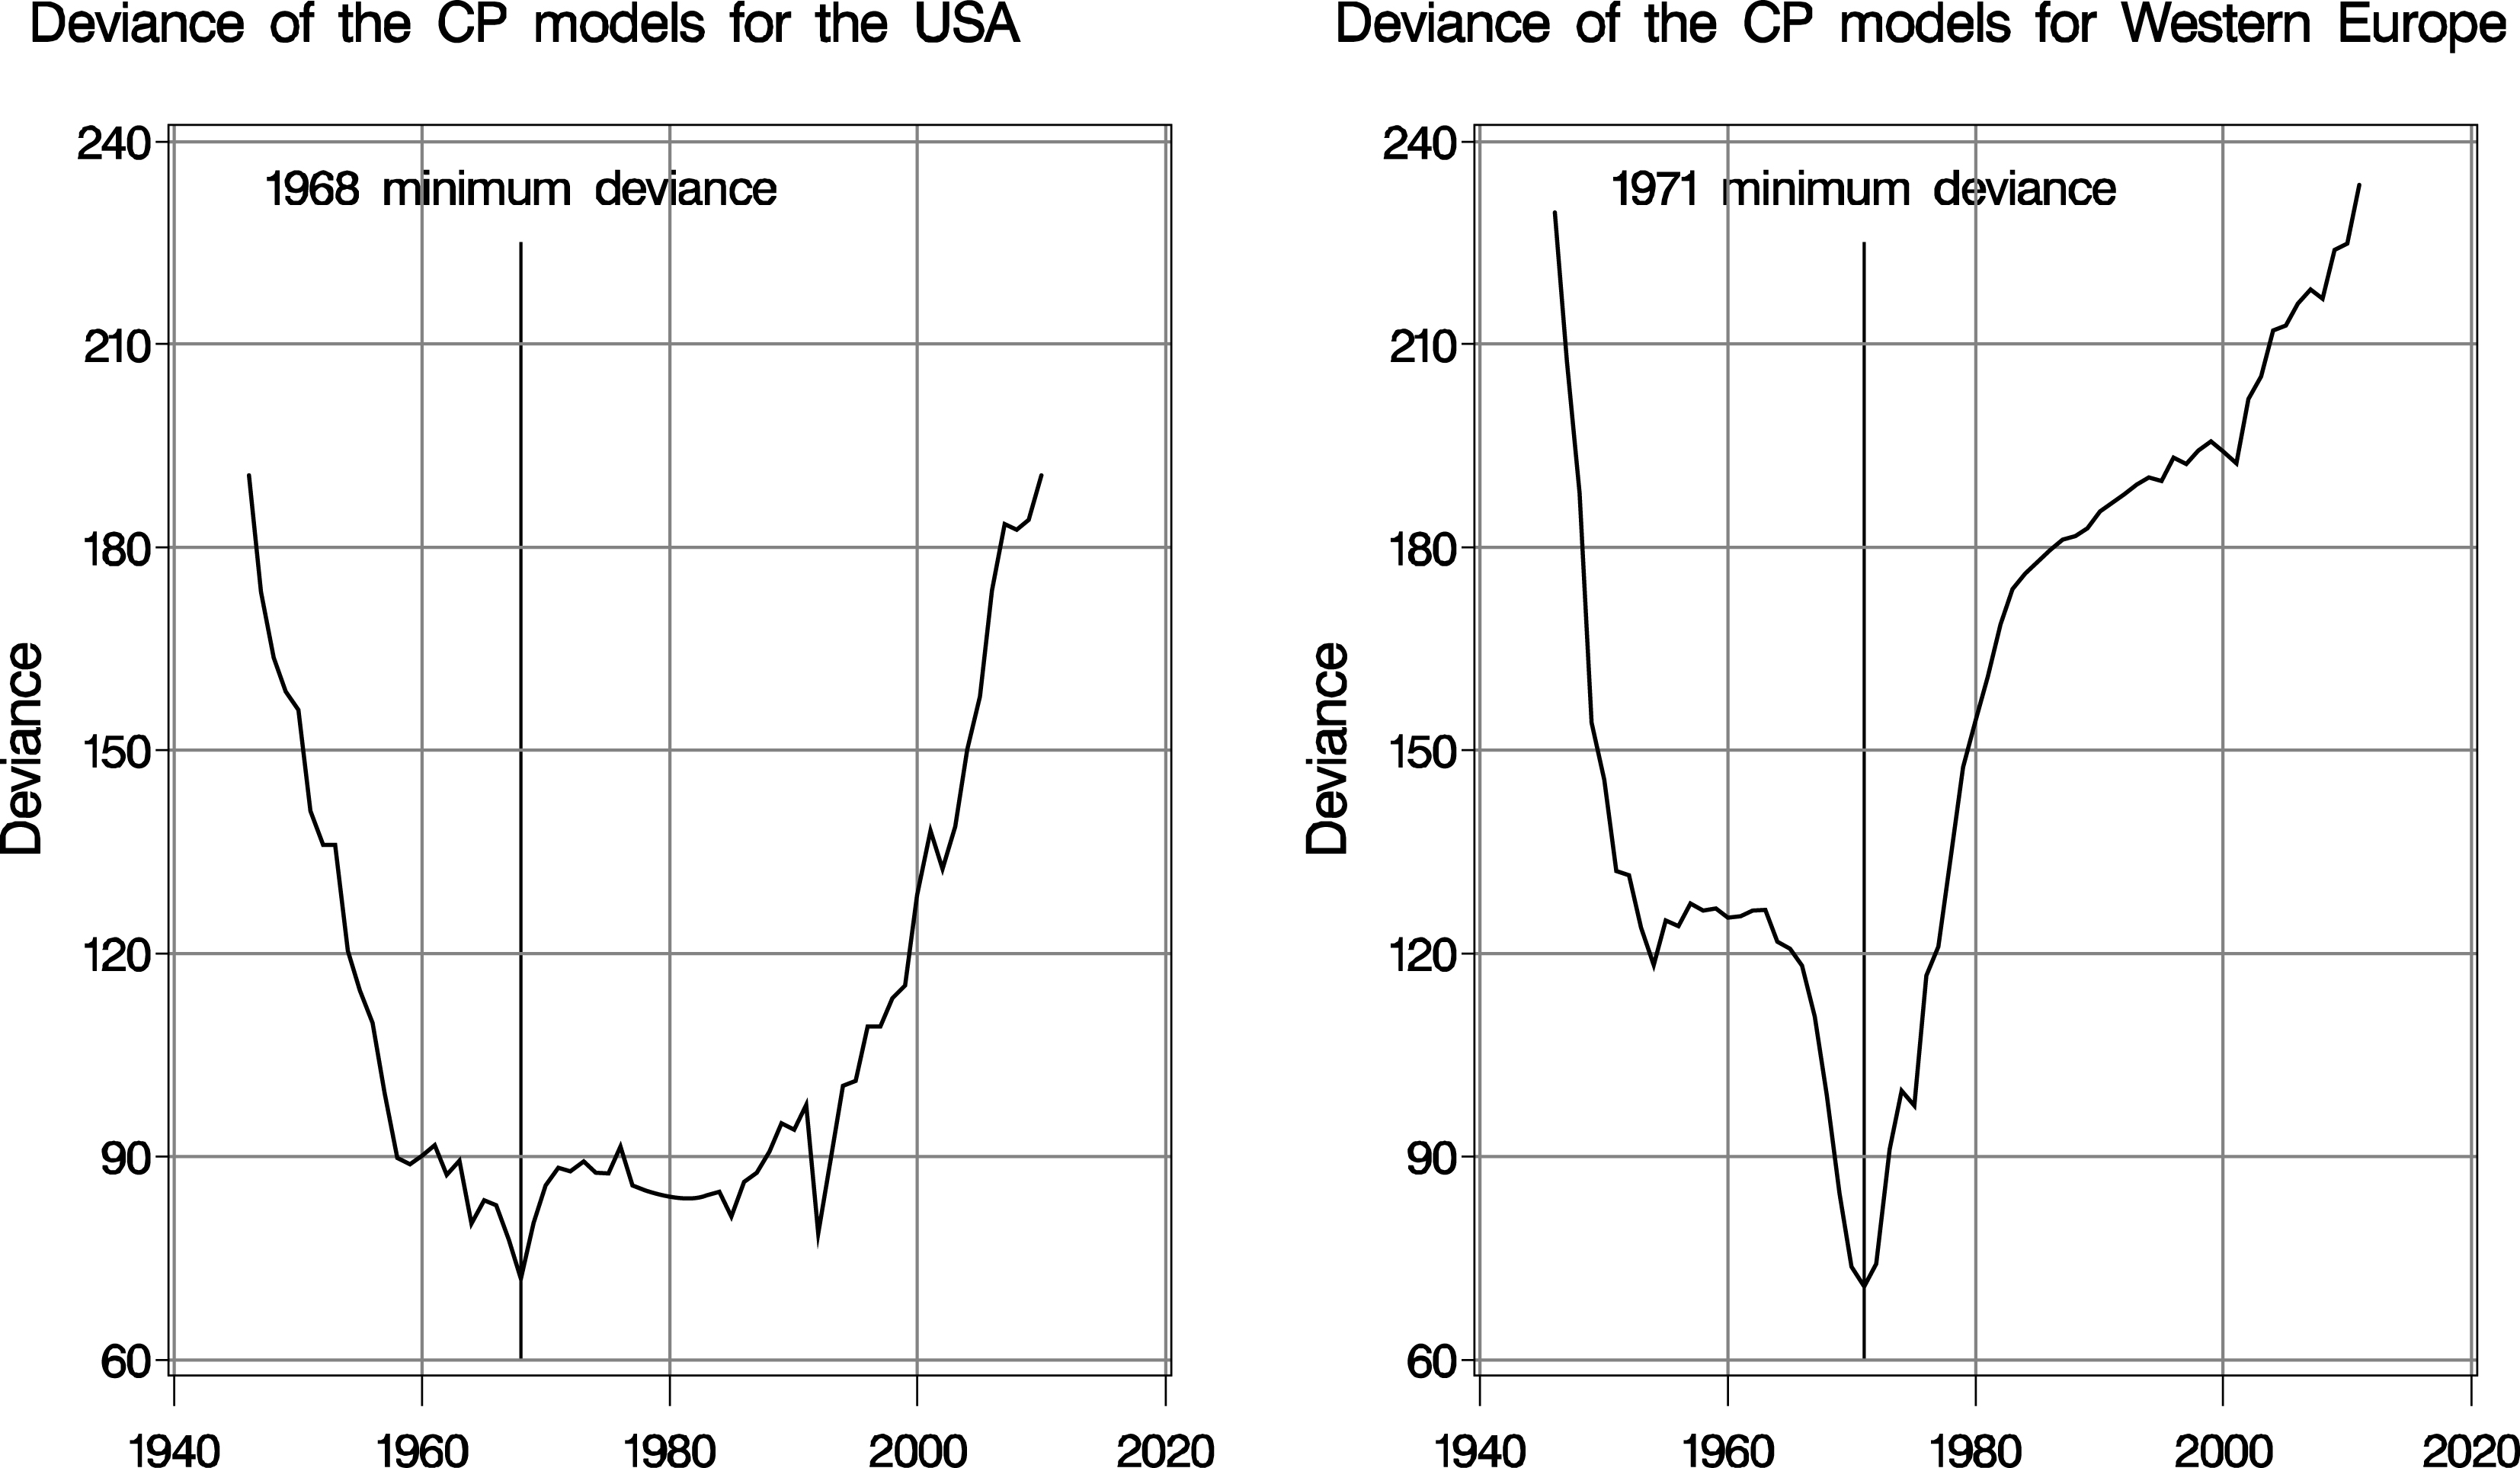 Change-point (CP) analyses based on the minimum deviance criterion for the sex ratio trends from 1946 to 2010 in the USA and for the sex ratio trends from 1946 to 2011 in Western Europe (Germany, France, Italy, Spain, and United Kingdom).